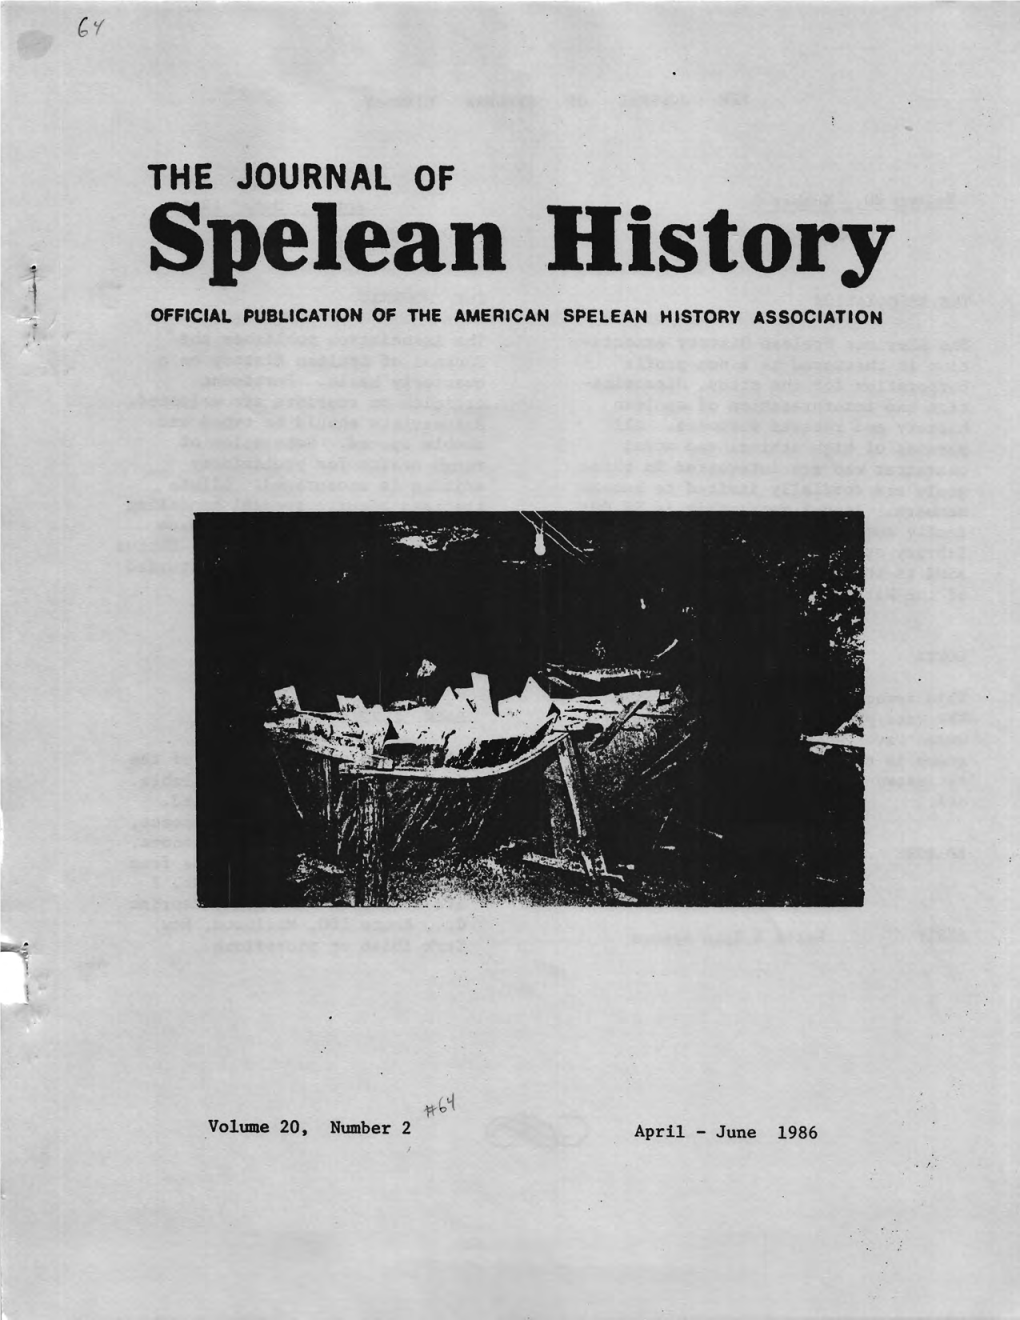 Spelean History OFFICIAL PUBLICATION of the AMERICAN SPELEAN HISTORY ASSOCIATION